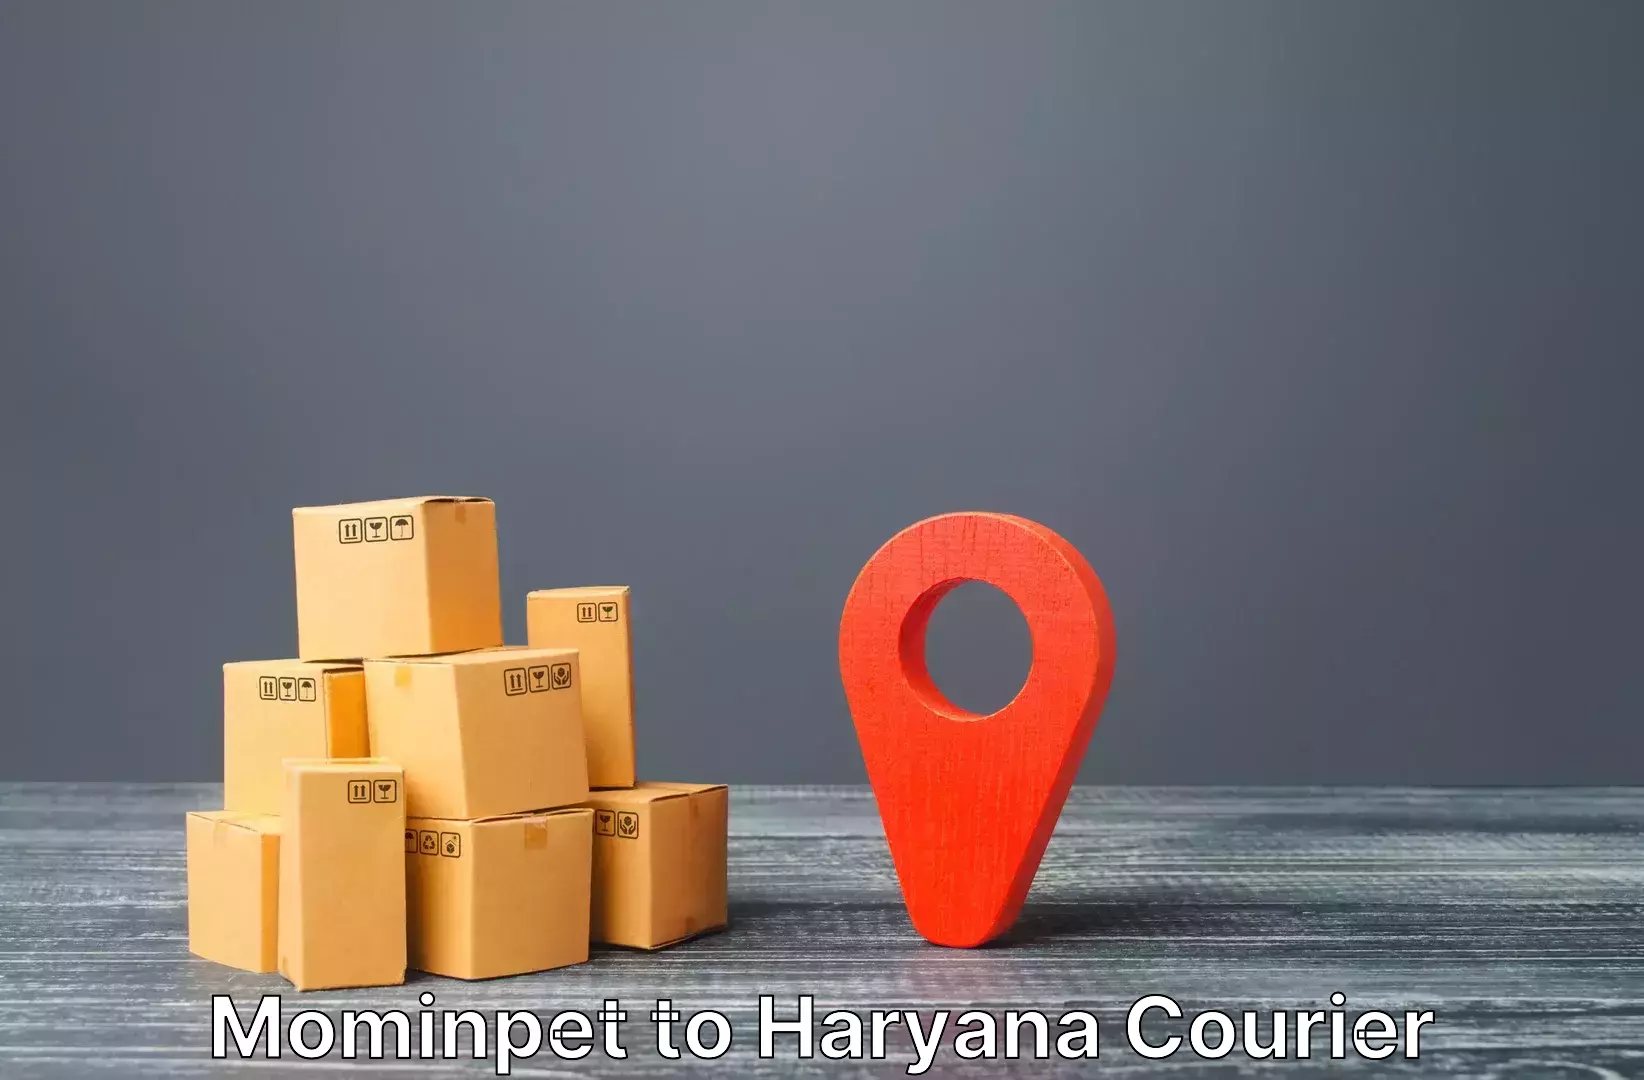 Luggage delivery app Mominpet to Gurgaon